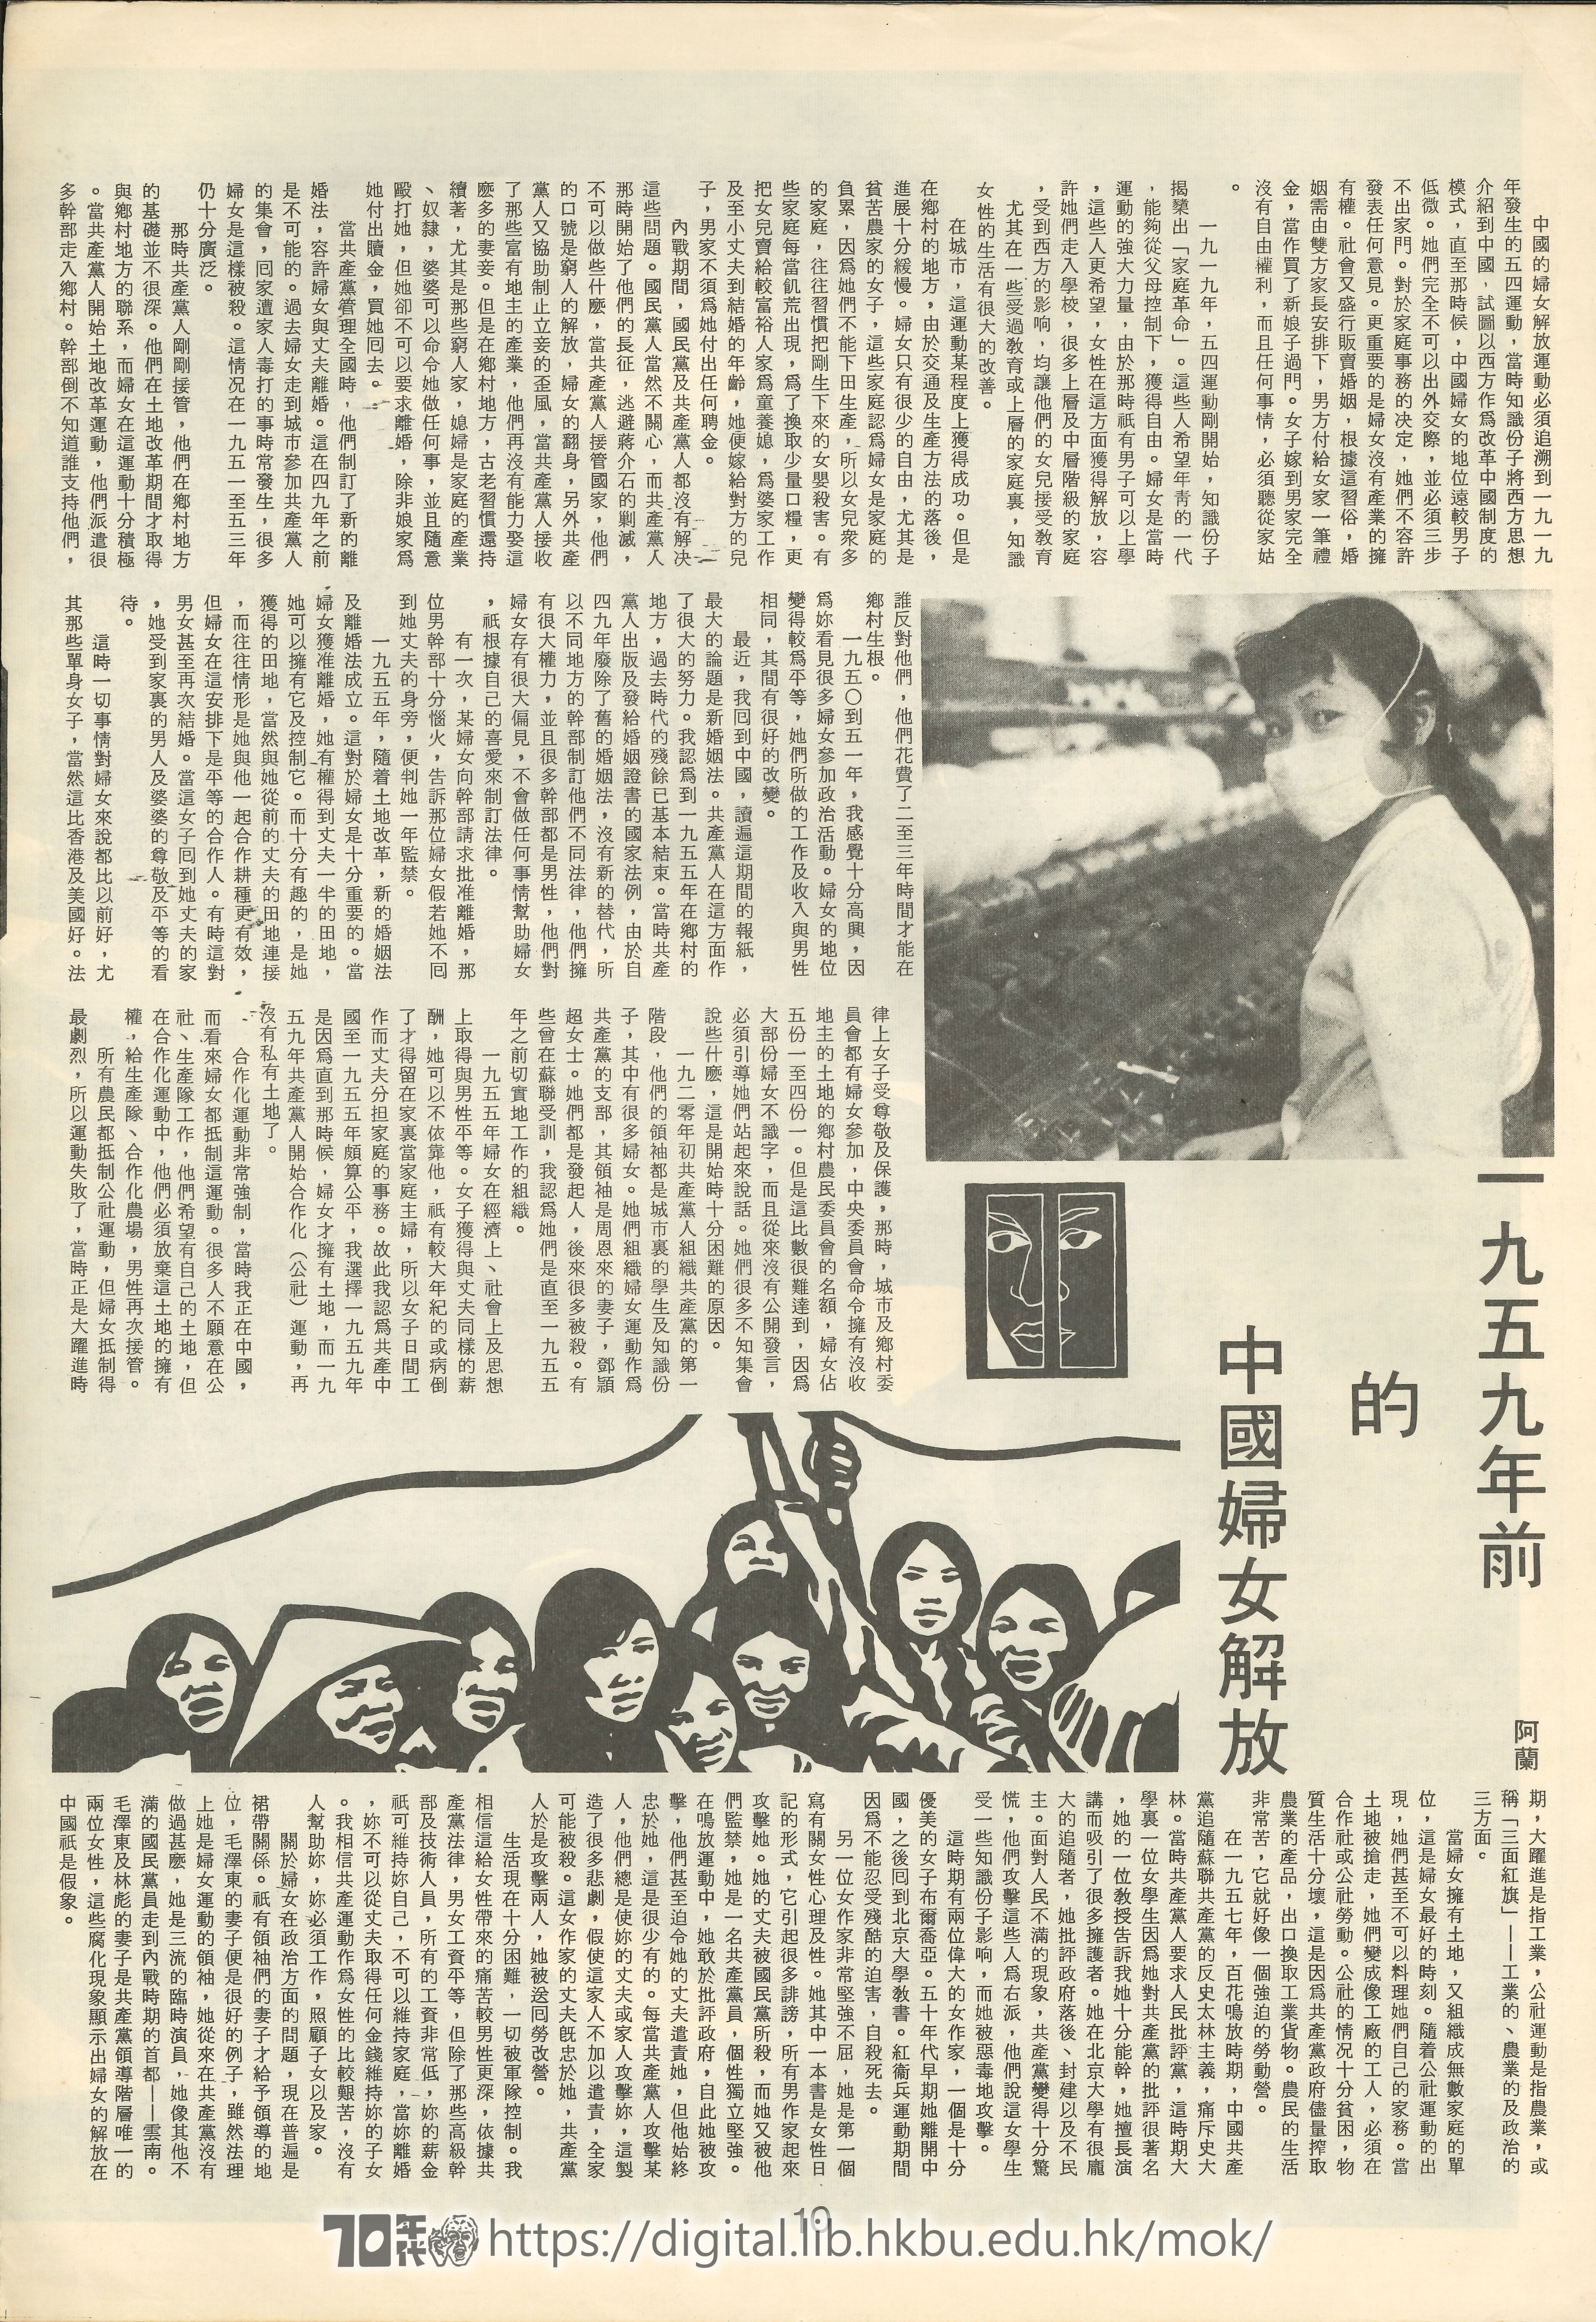  ���������2��� Women liberation movement in China before 1959 阿蘭 